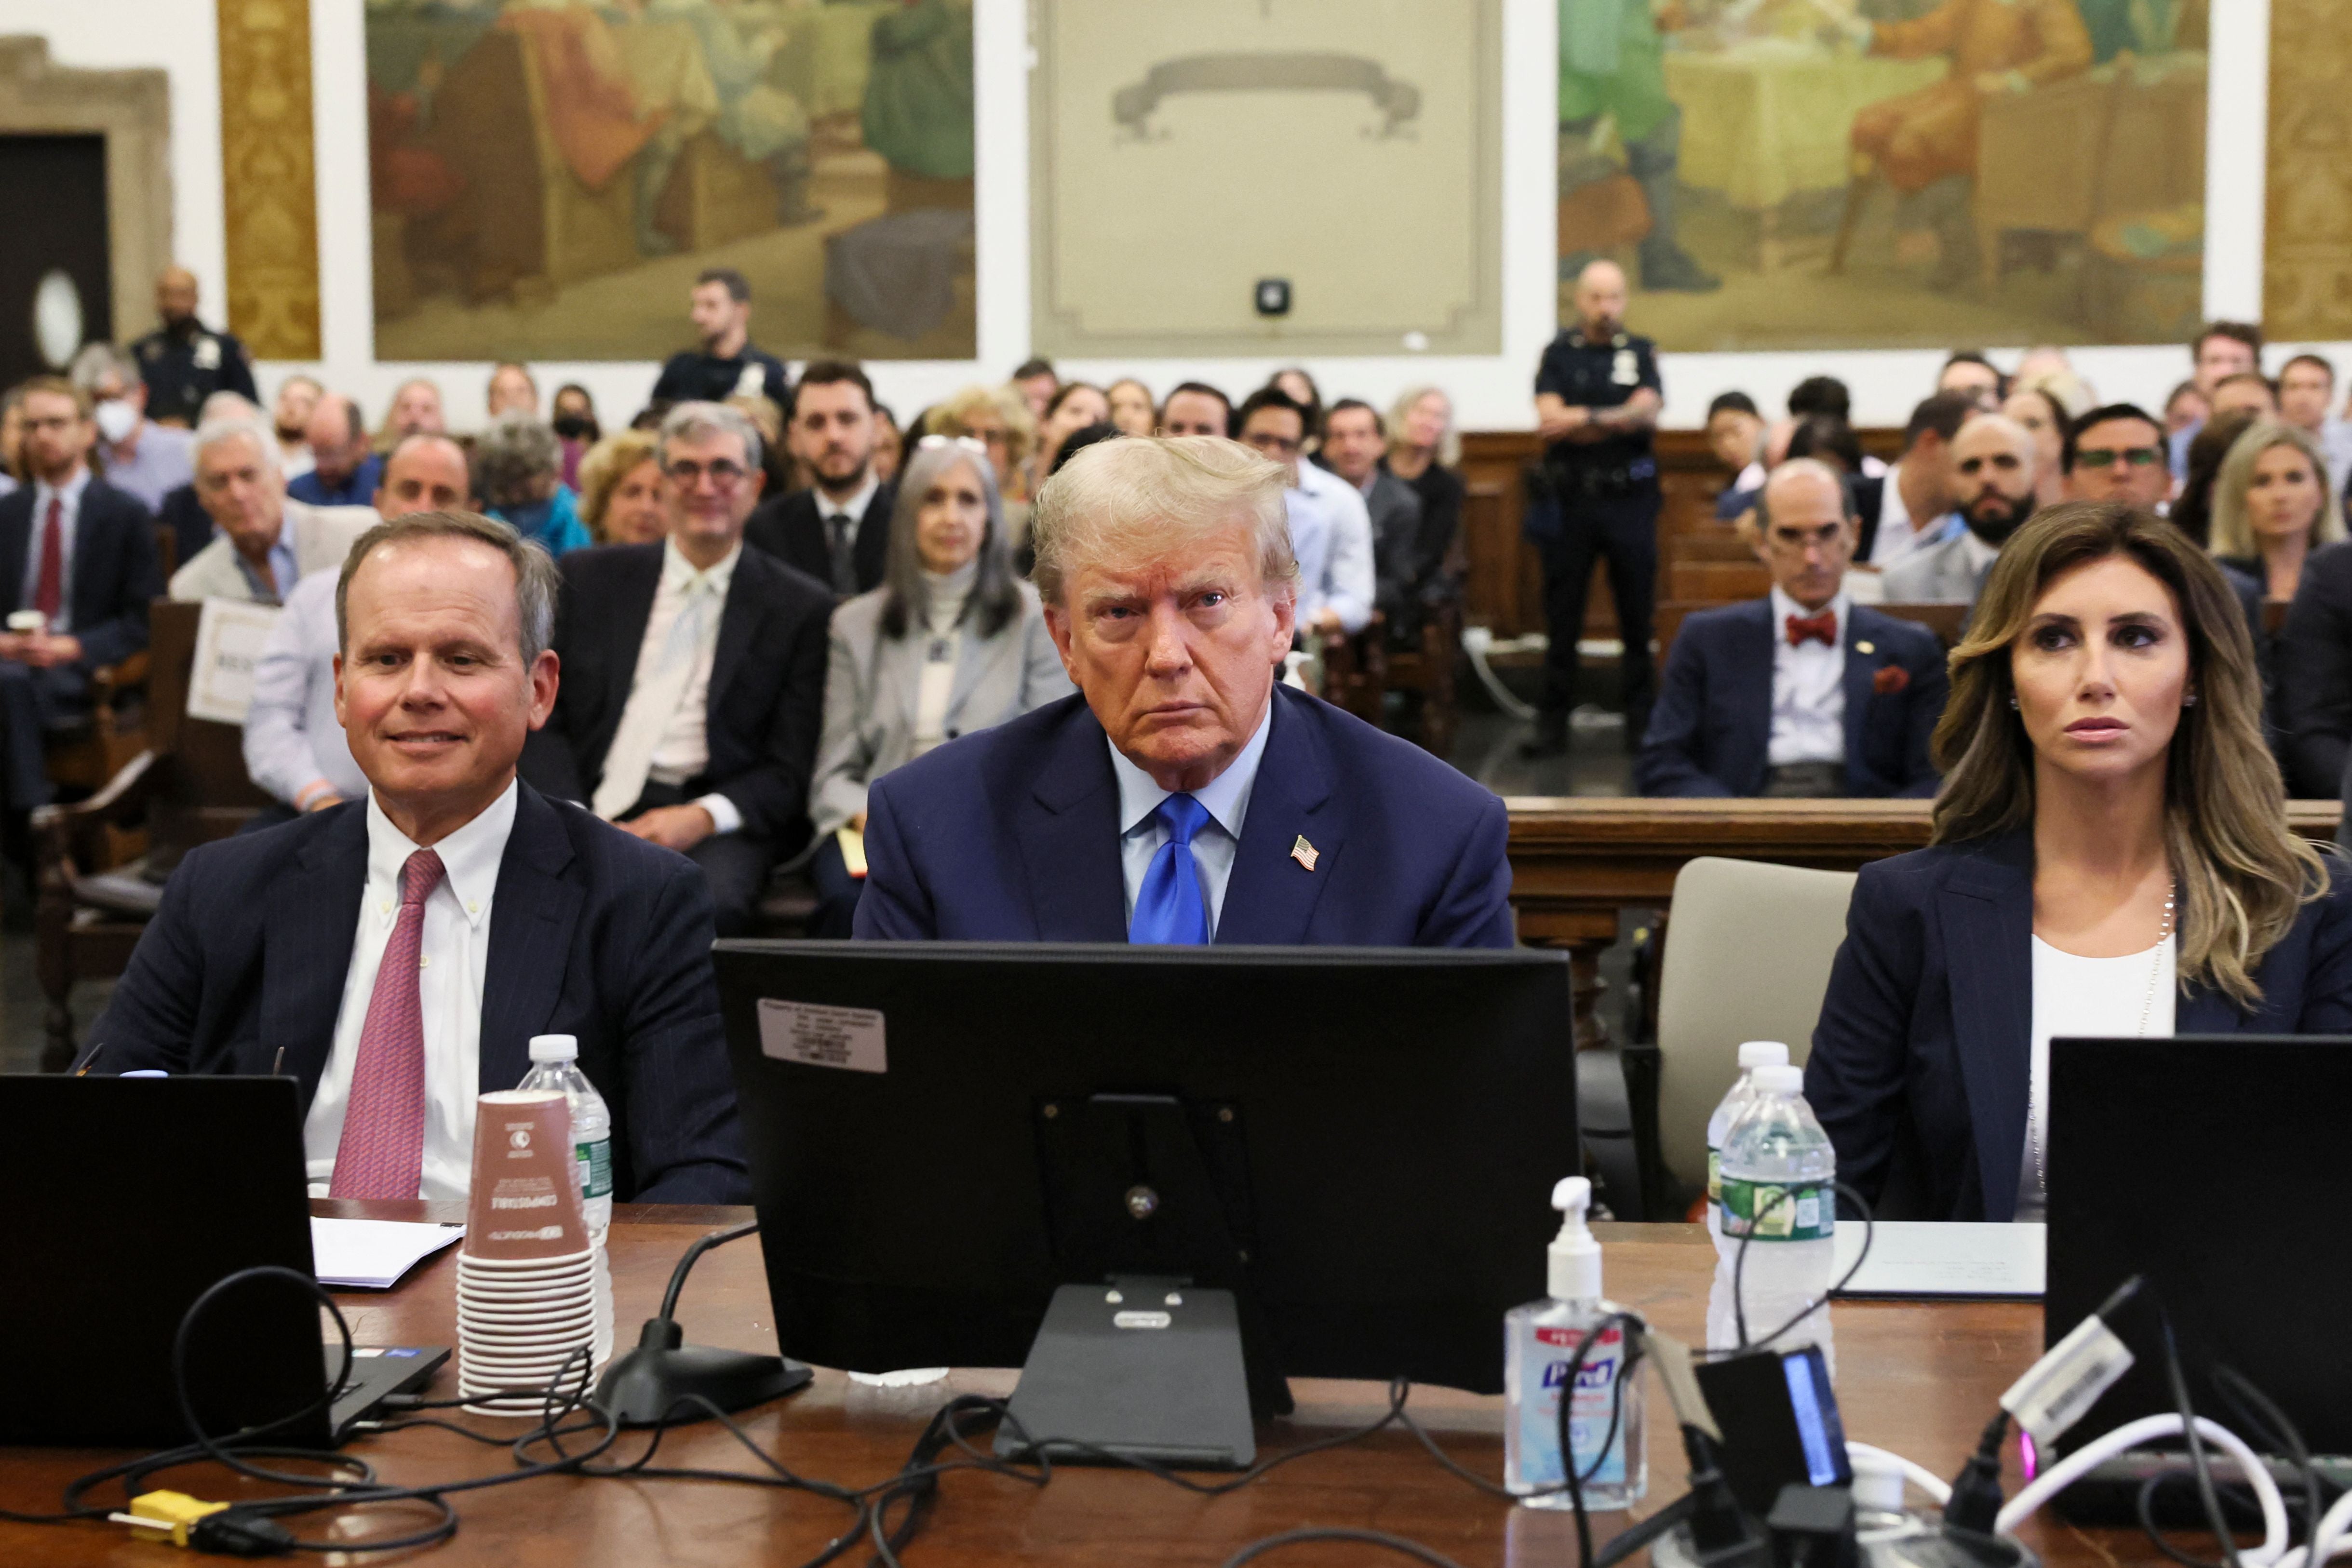 Donald Trump in court at the start of his New York civil fraud trial